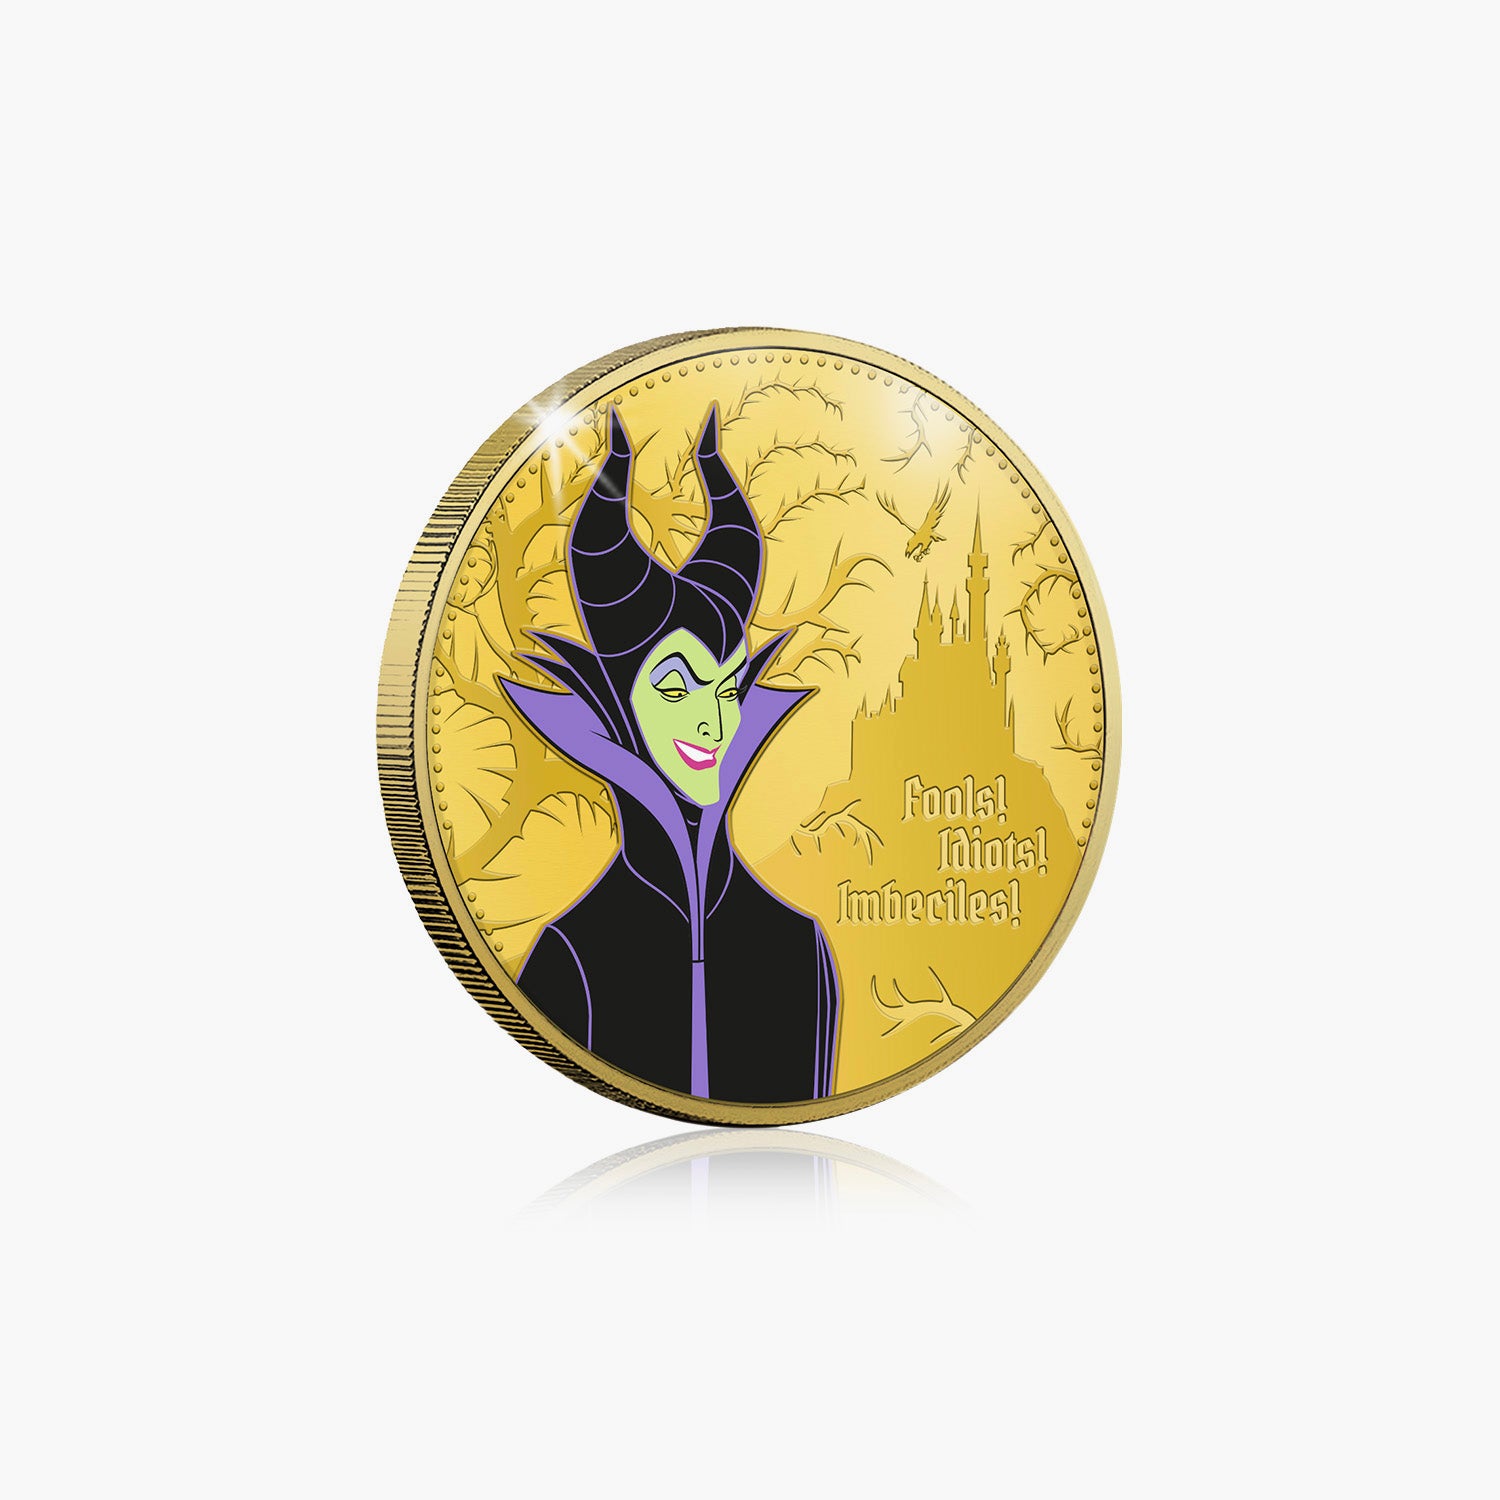 Maleficent Gold-Plated Commemorative